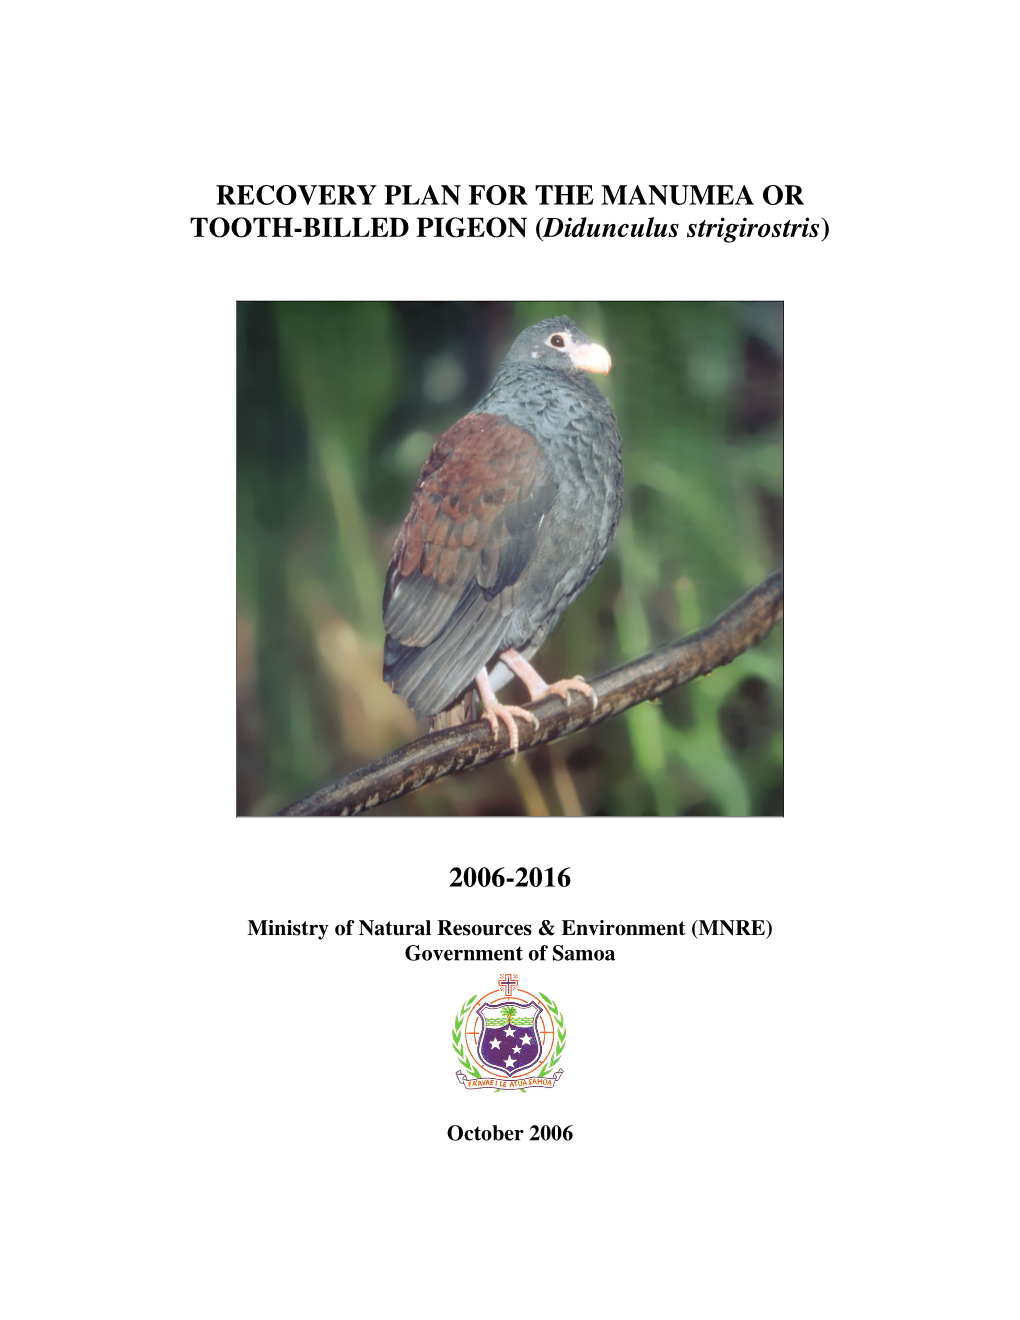 RECOVERY PLAN for the MANUMEA OR TOOTH-BILLED PIGEON (Didunculus Strigirostris) 2006-2016